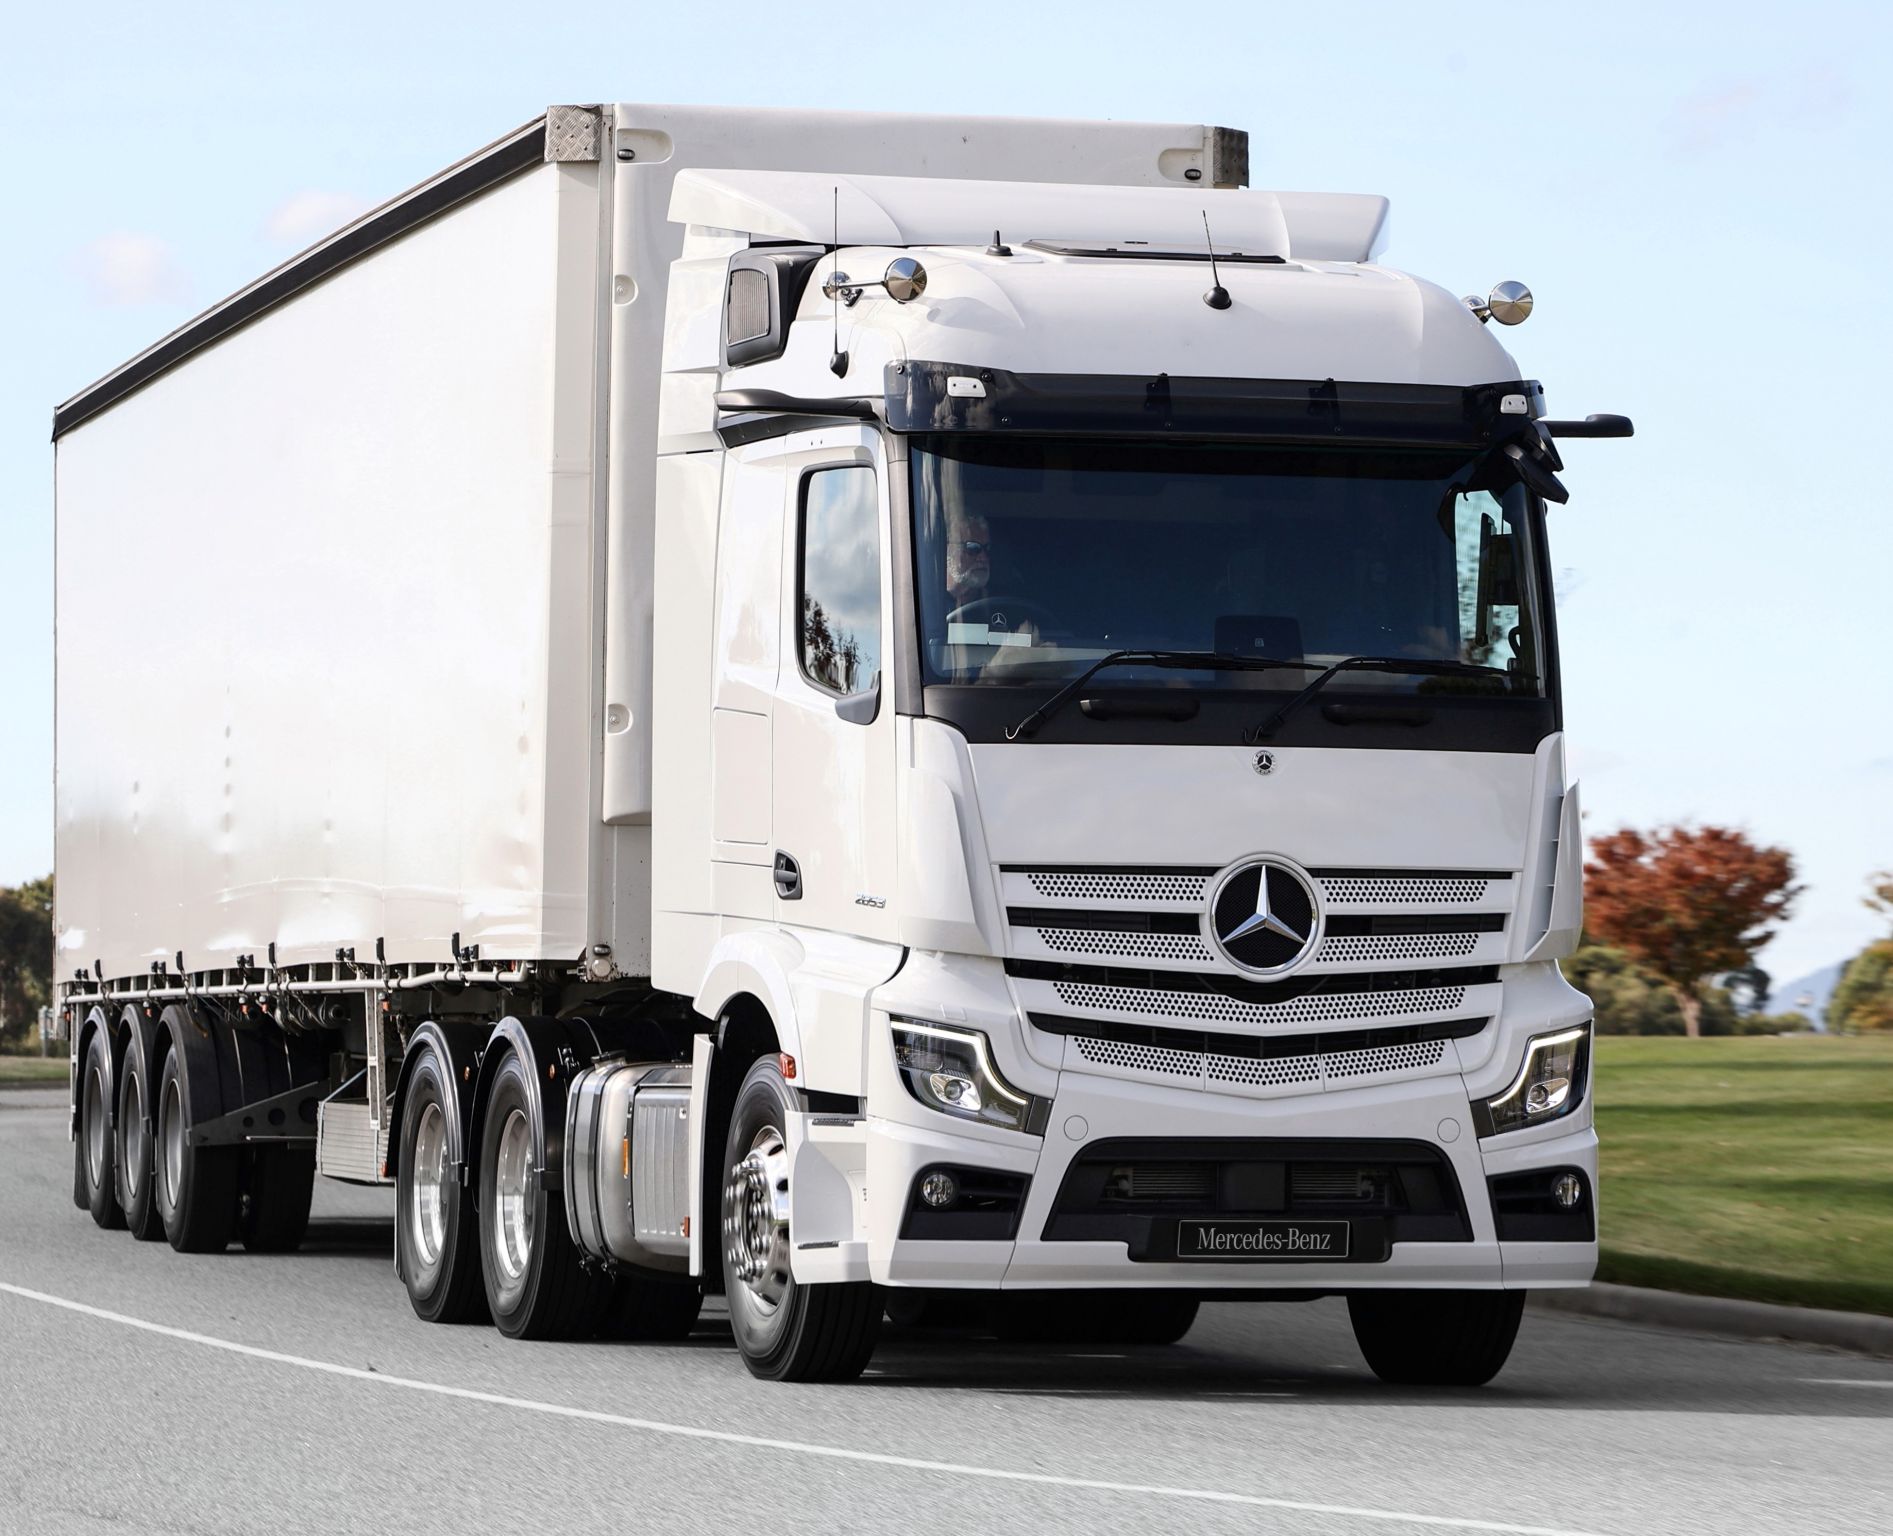 The fuel economy of the Mercedes-Benz Trucks Actros was already legendary.